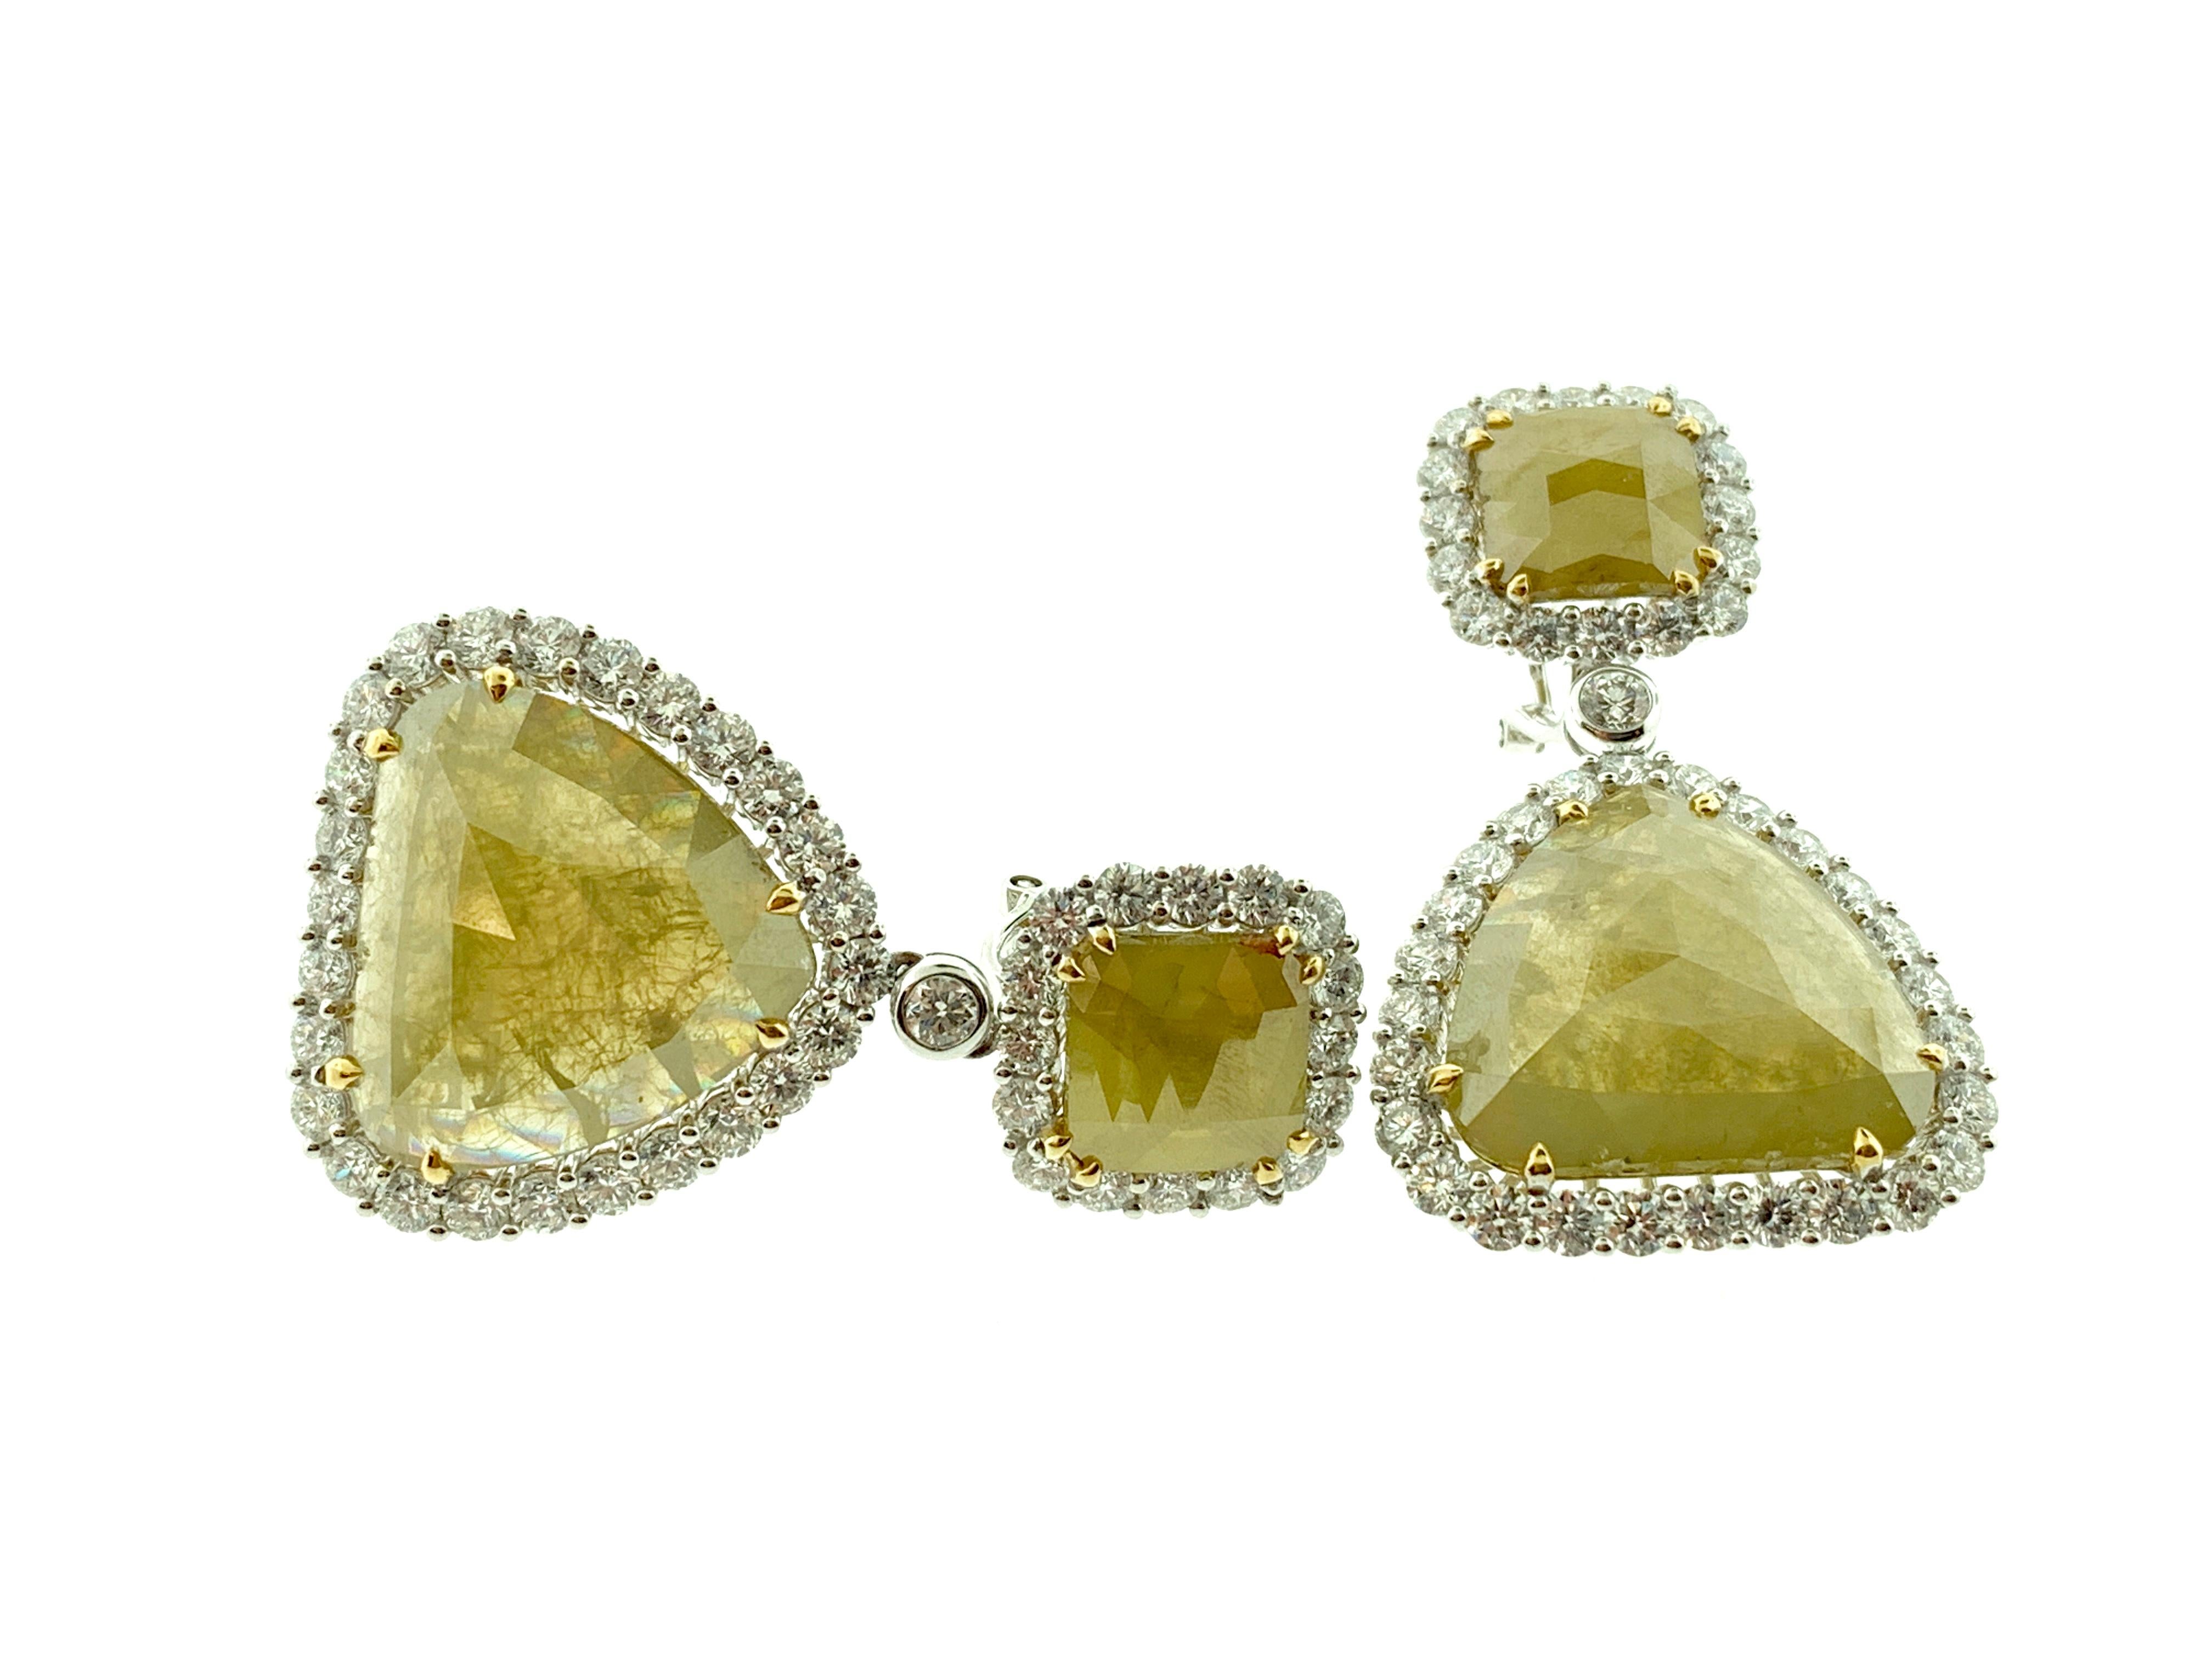 These stunning earrings feature 2 Rose Cut Natural (unheated) Fancy Yellow Diamonds, total of 32.52 carats, encircled in a single halo of round brilliant Diamonds. 

They are hanging from Emerald Cut Natural Fancy Yellow Diamonds, total of 7.66